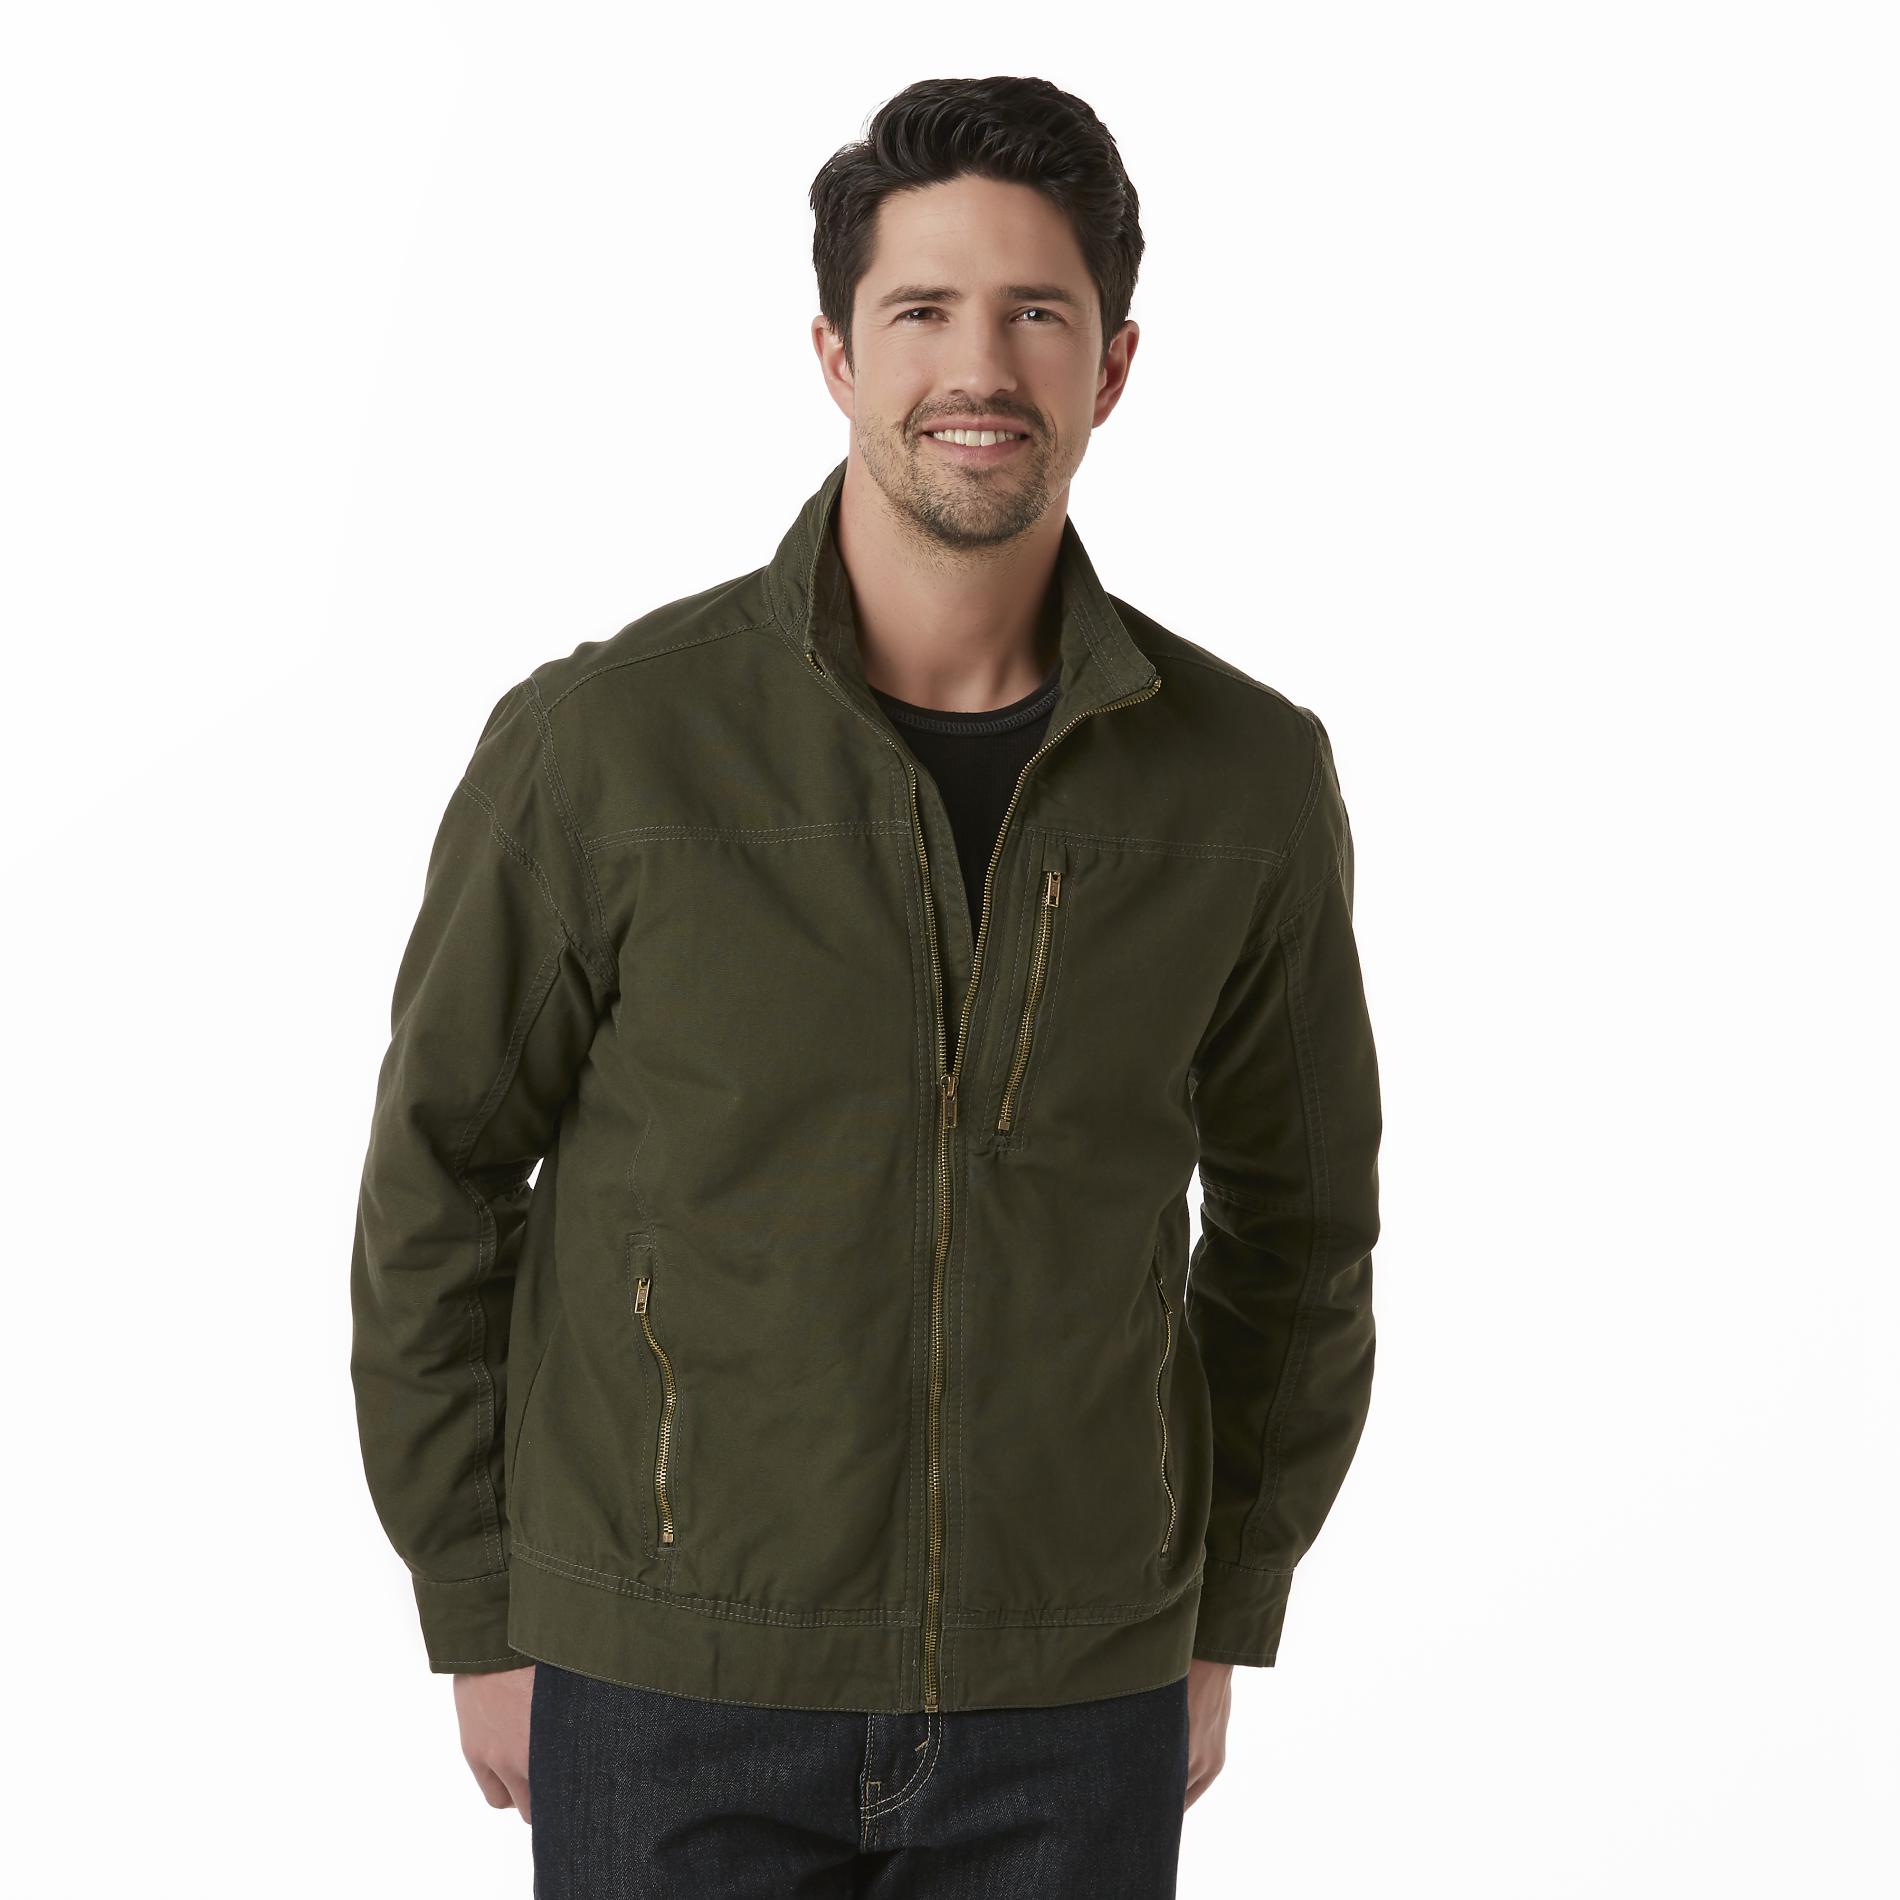 Outdoor Life Men's Canvas Jacket | Shop Your Way: Online Shopping